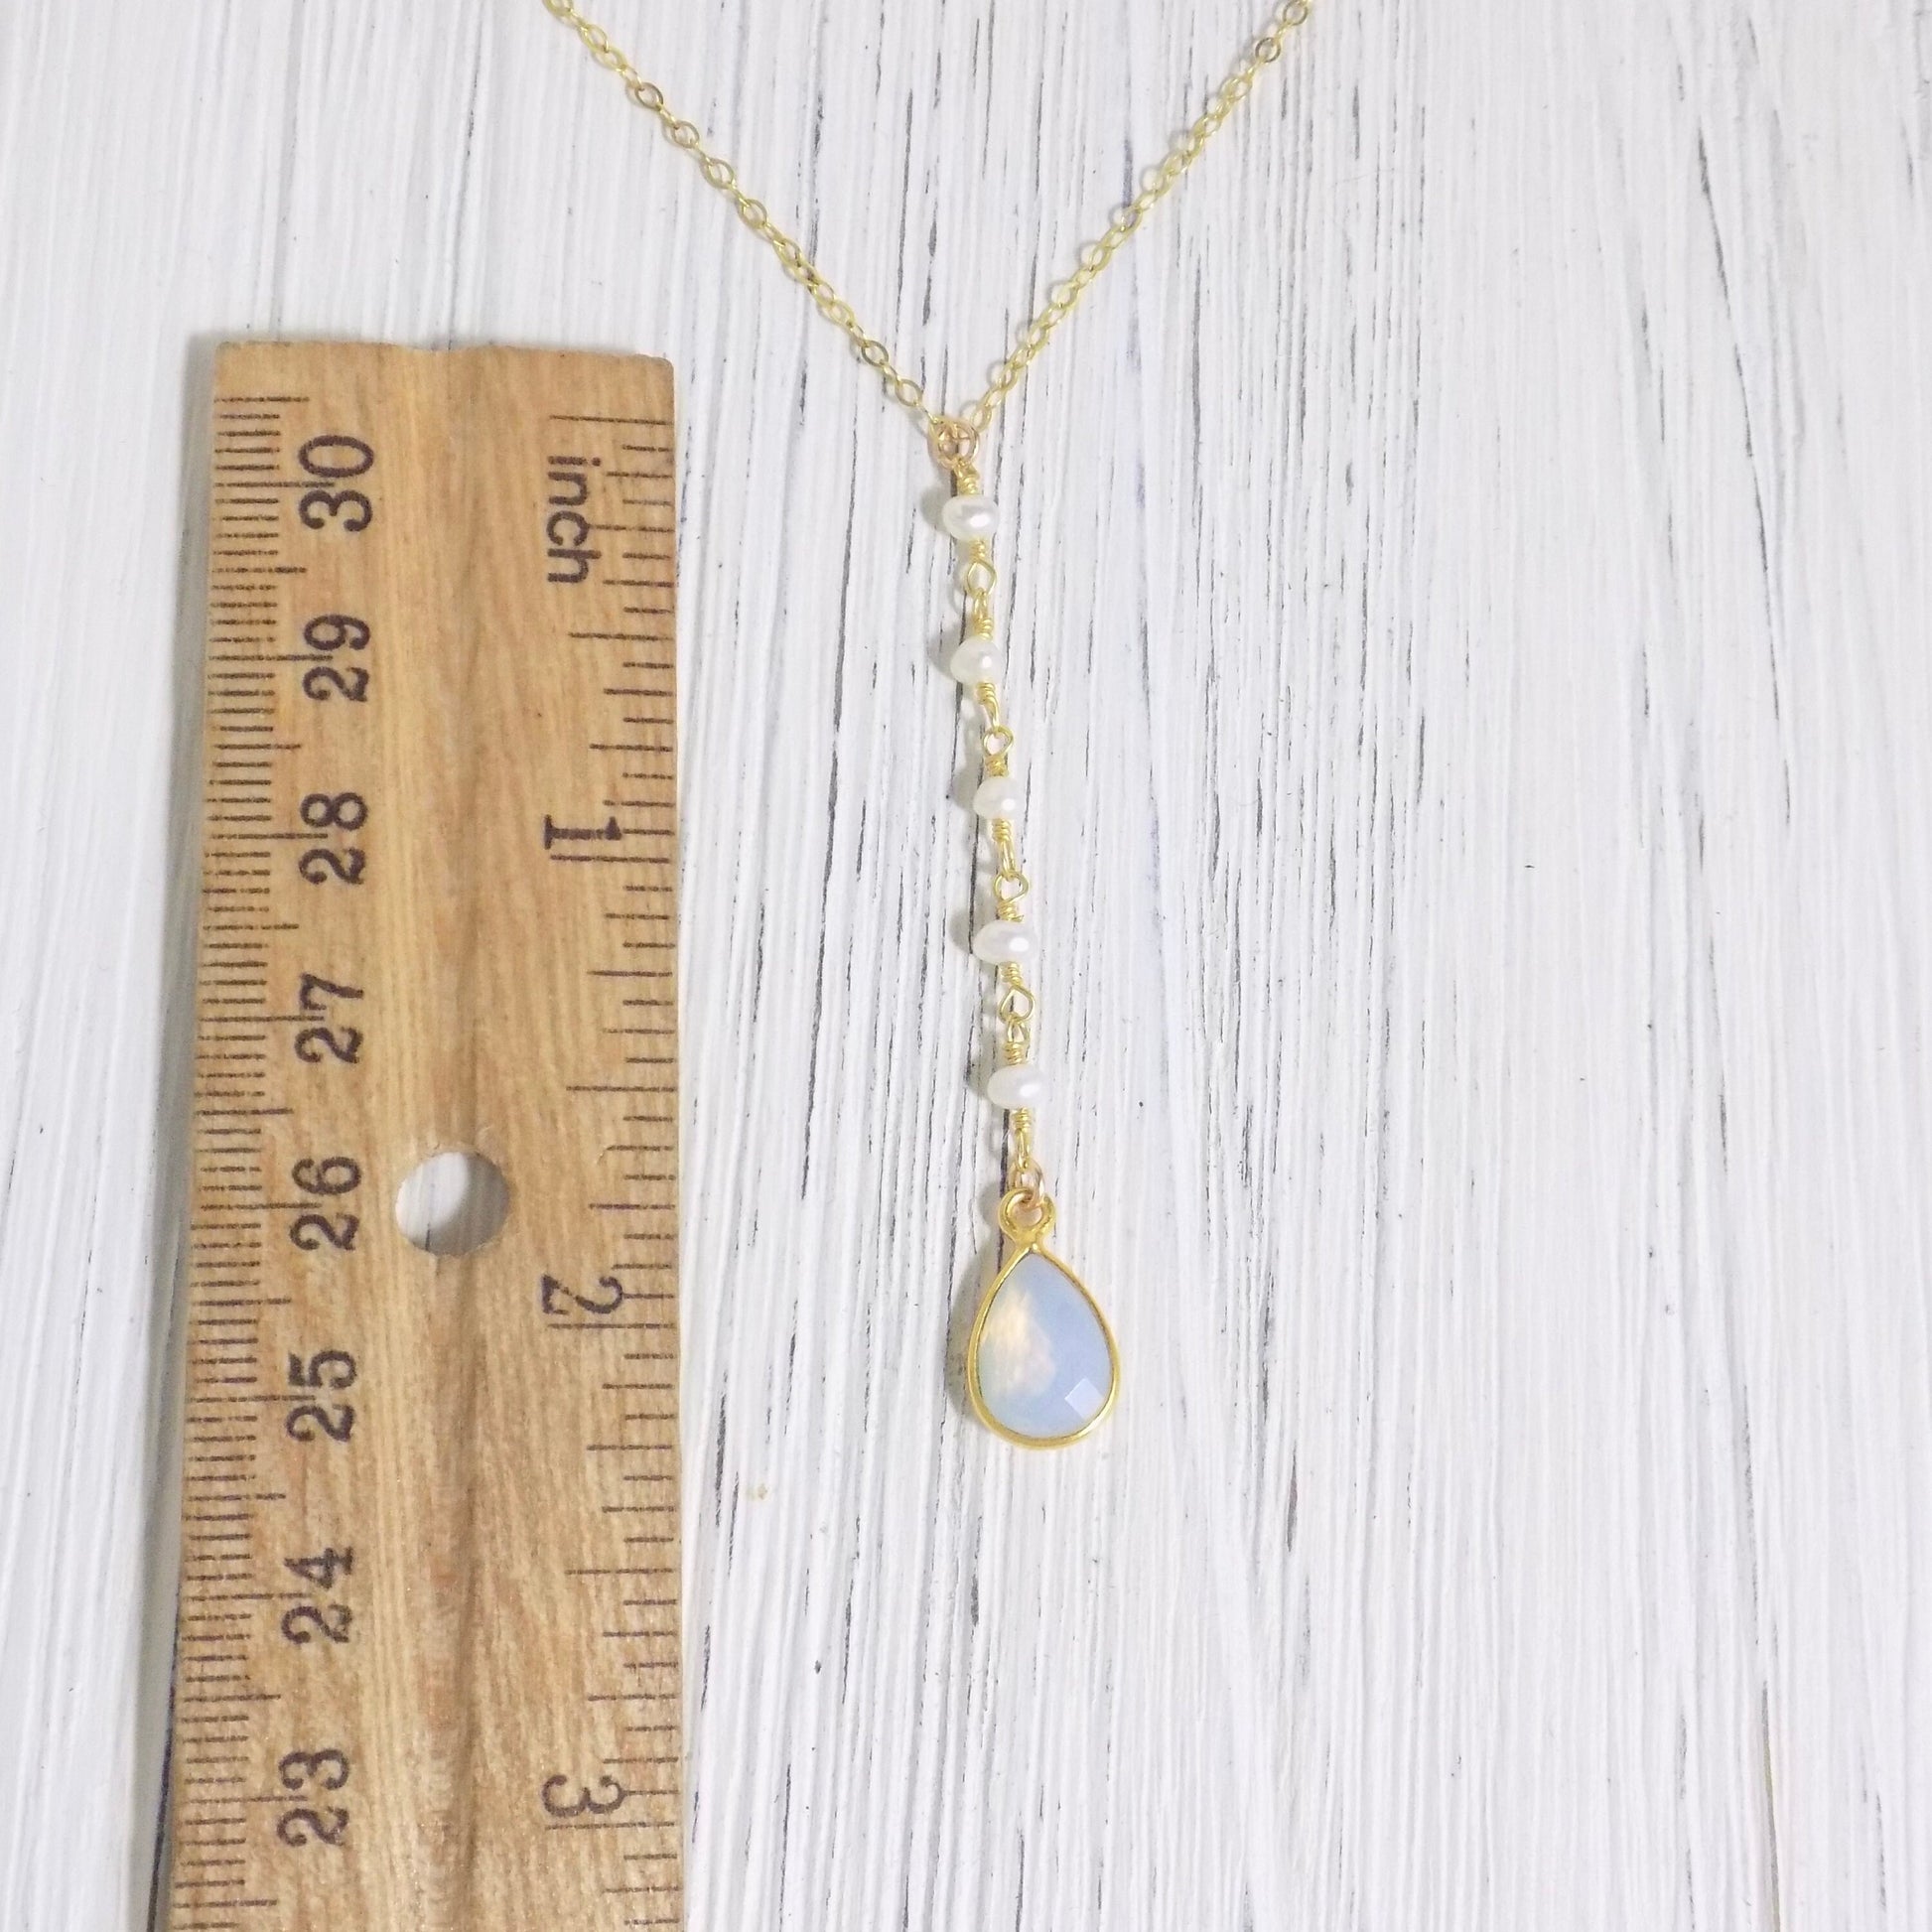 Freshwater Pearl Y Necklace Gold, Opal Lariat Necklace Gold, Opalite October Birthstone, Gifts For Wife, M4-107